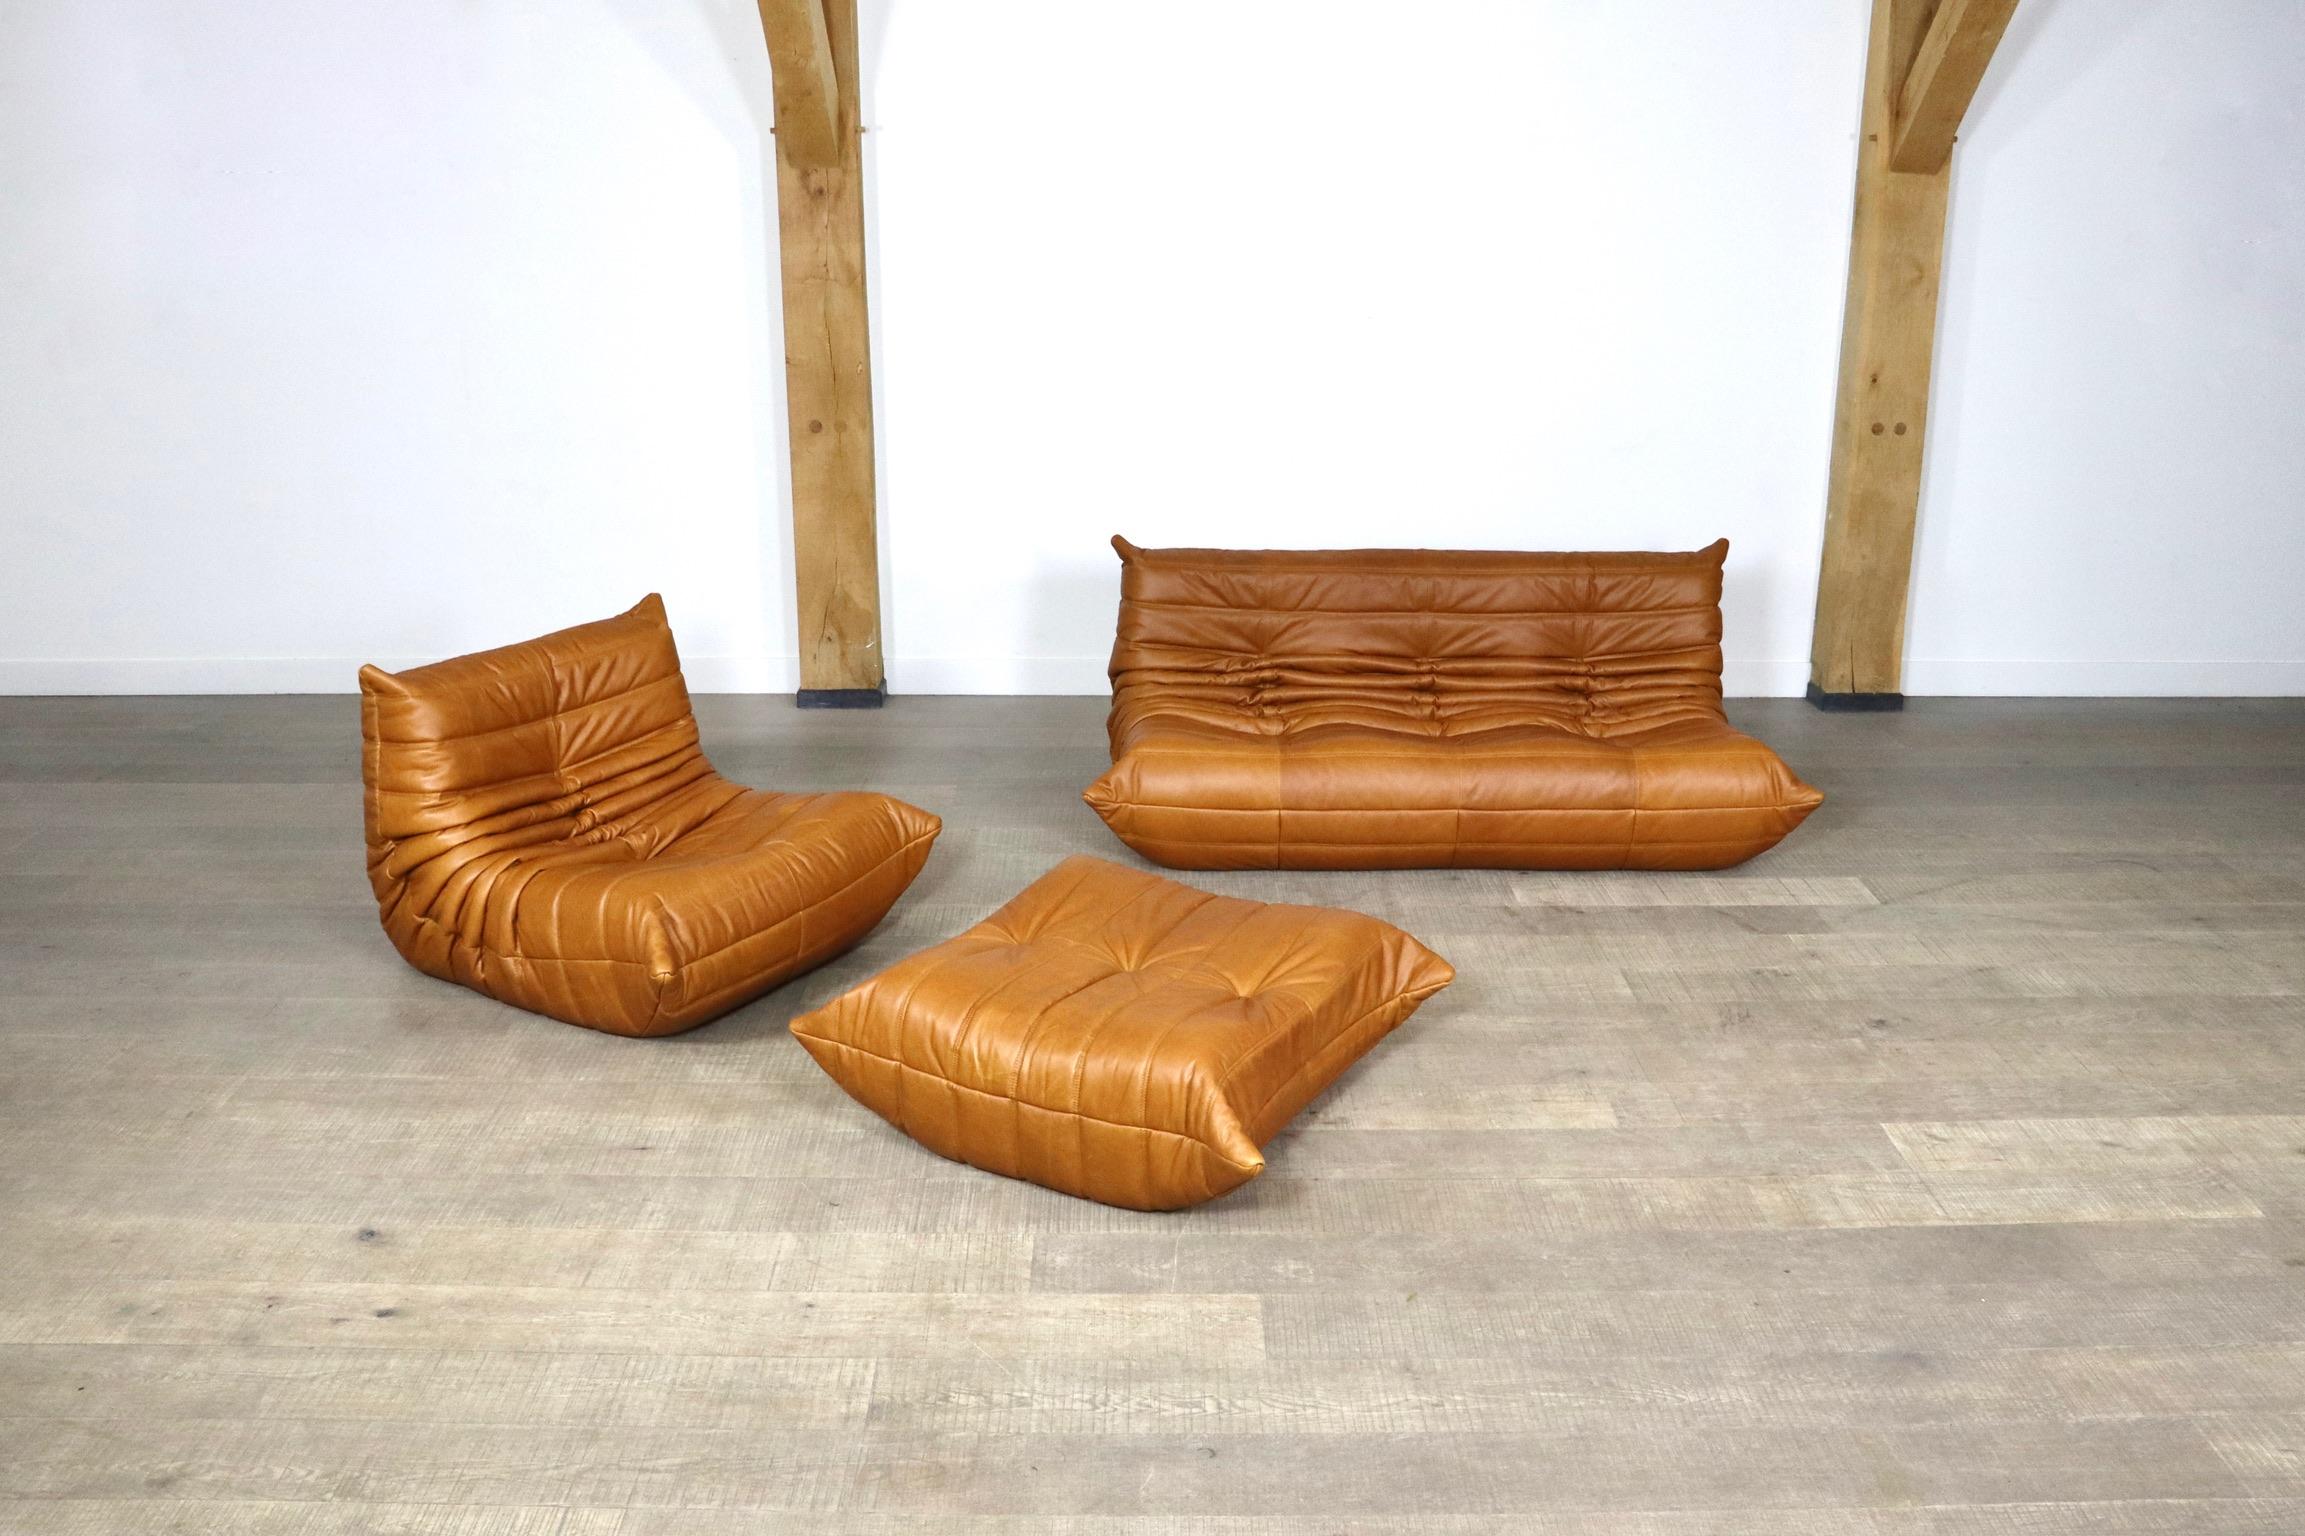 Beautiful cognac leather Togo seating group by Michel Ducaroy for Ligne Roset, 1980s. The entire seating group has the original Ligne Roset logo. The set consists of a 3-seaters, a lounge chair and an ottoman. The beautiful soft leather combines